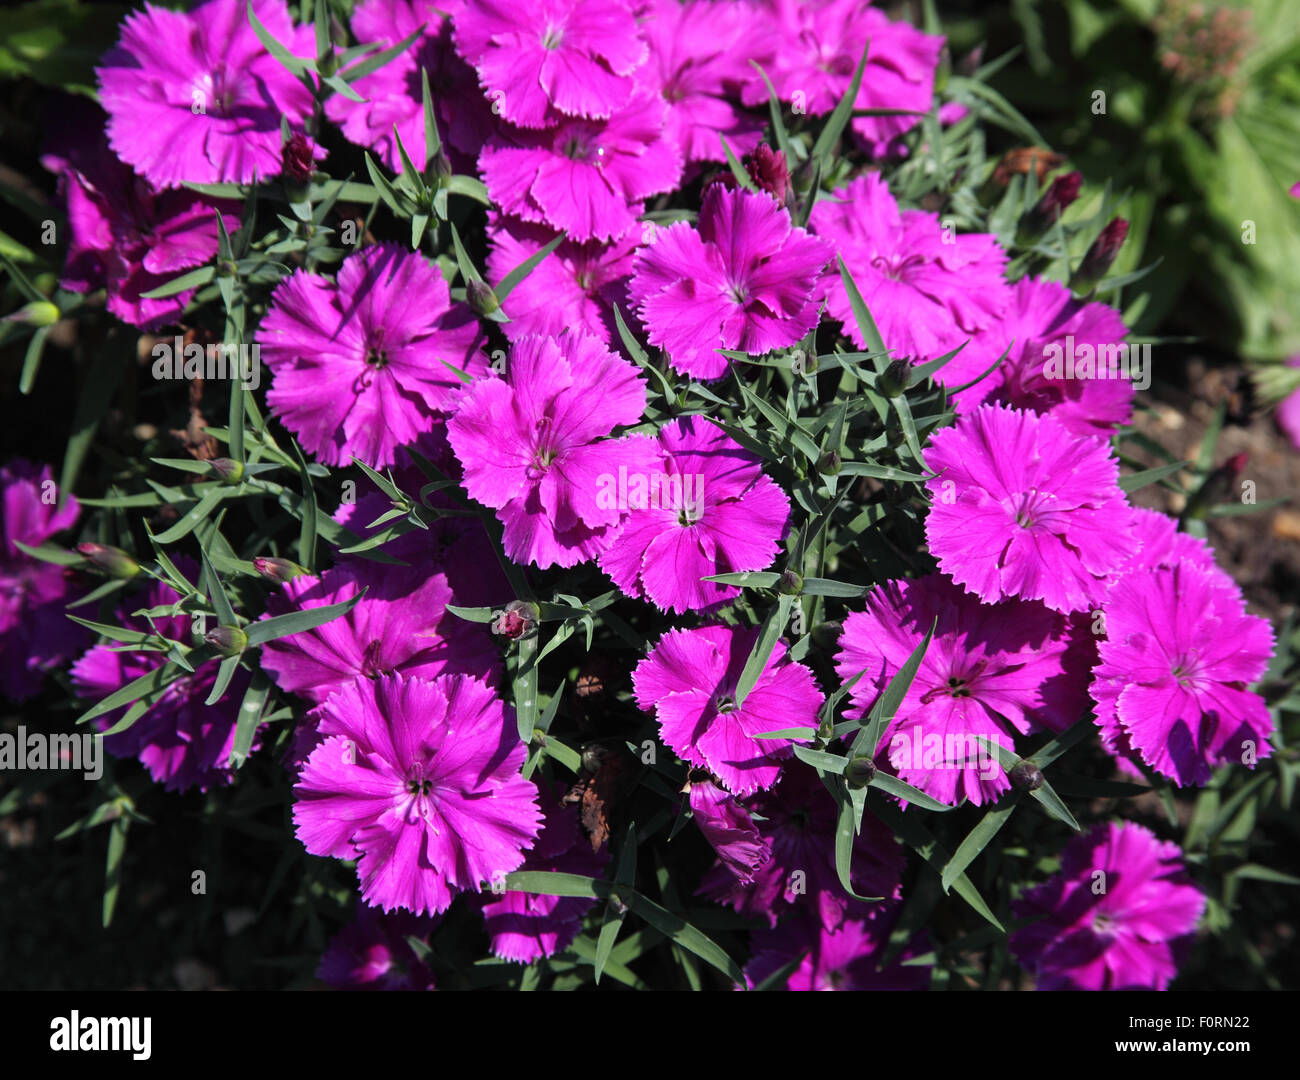 Dianthus chnensis 'Carpet series' close up of flowers Stock Photo